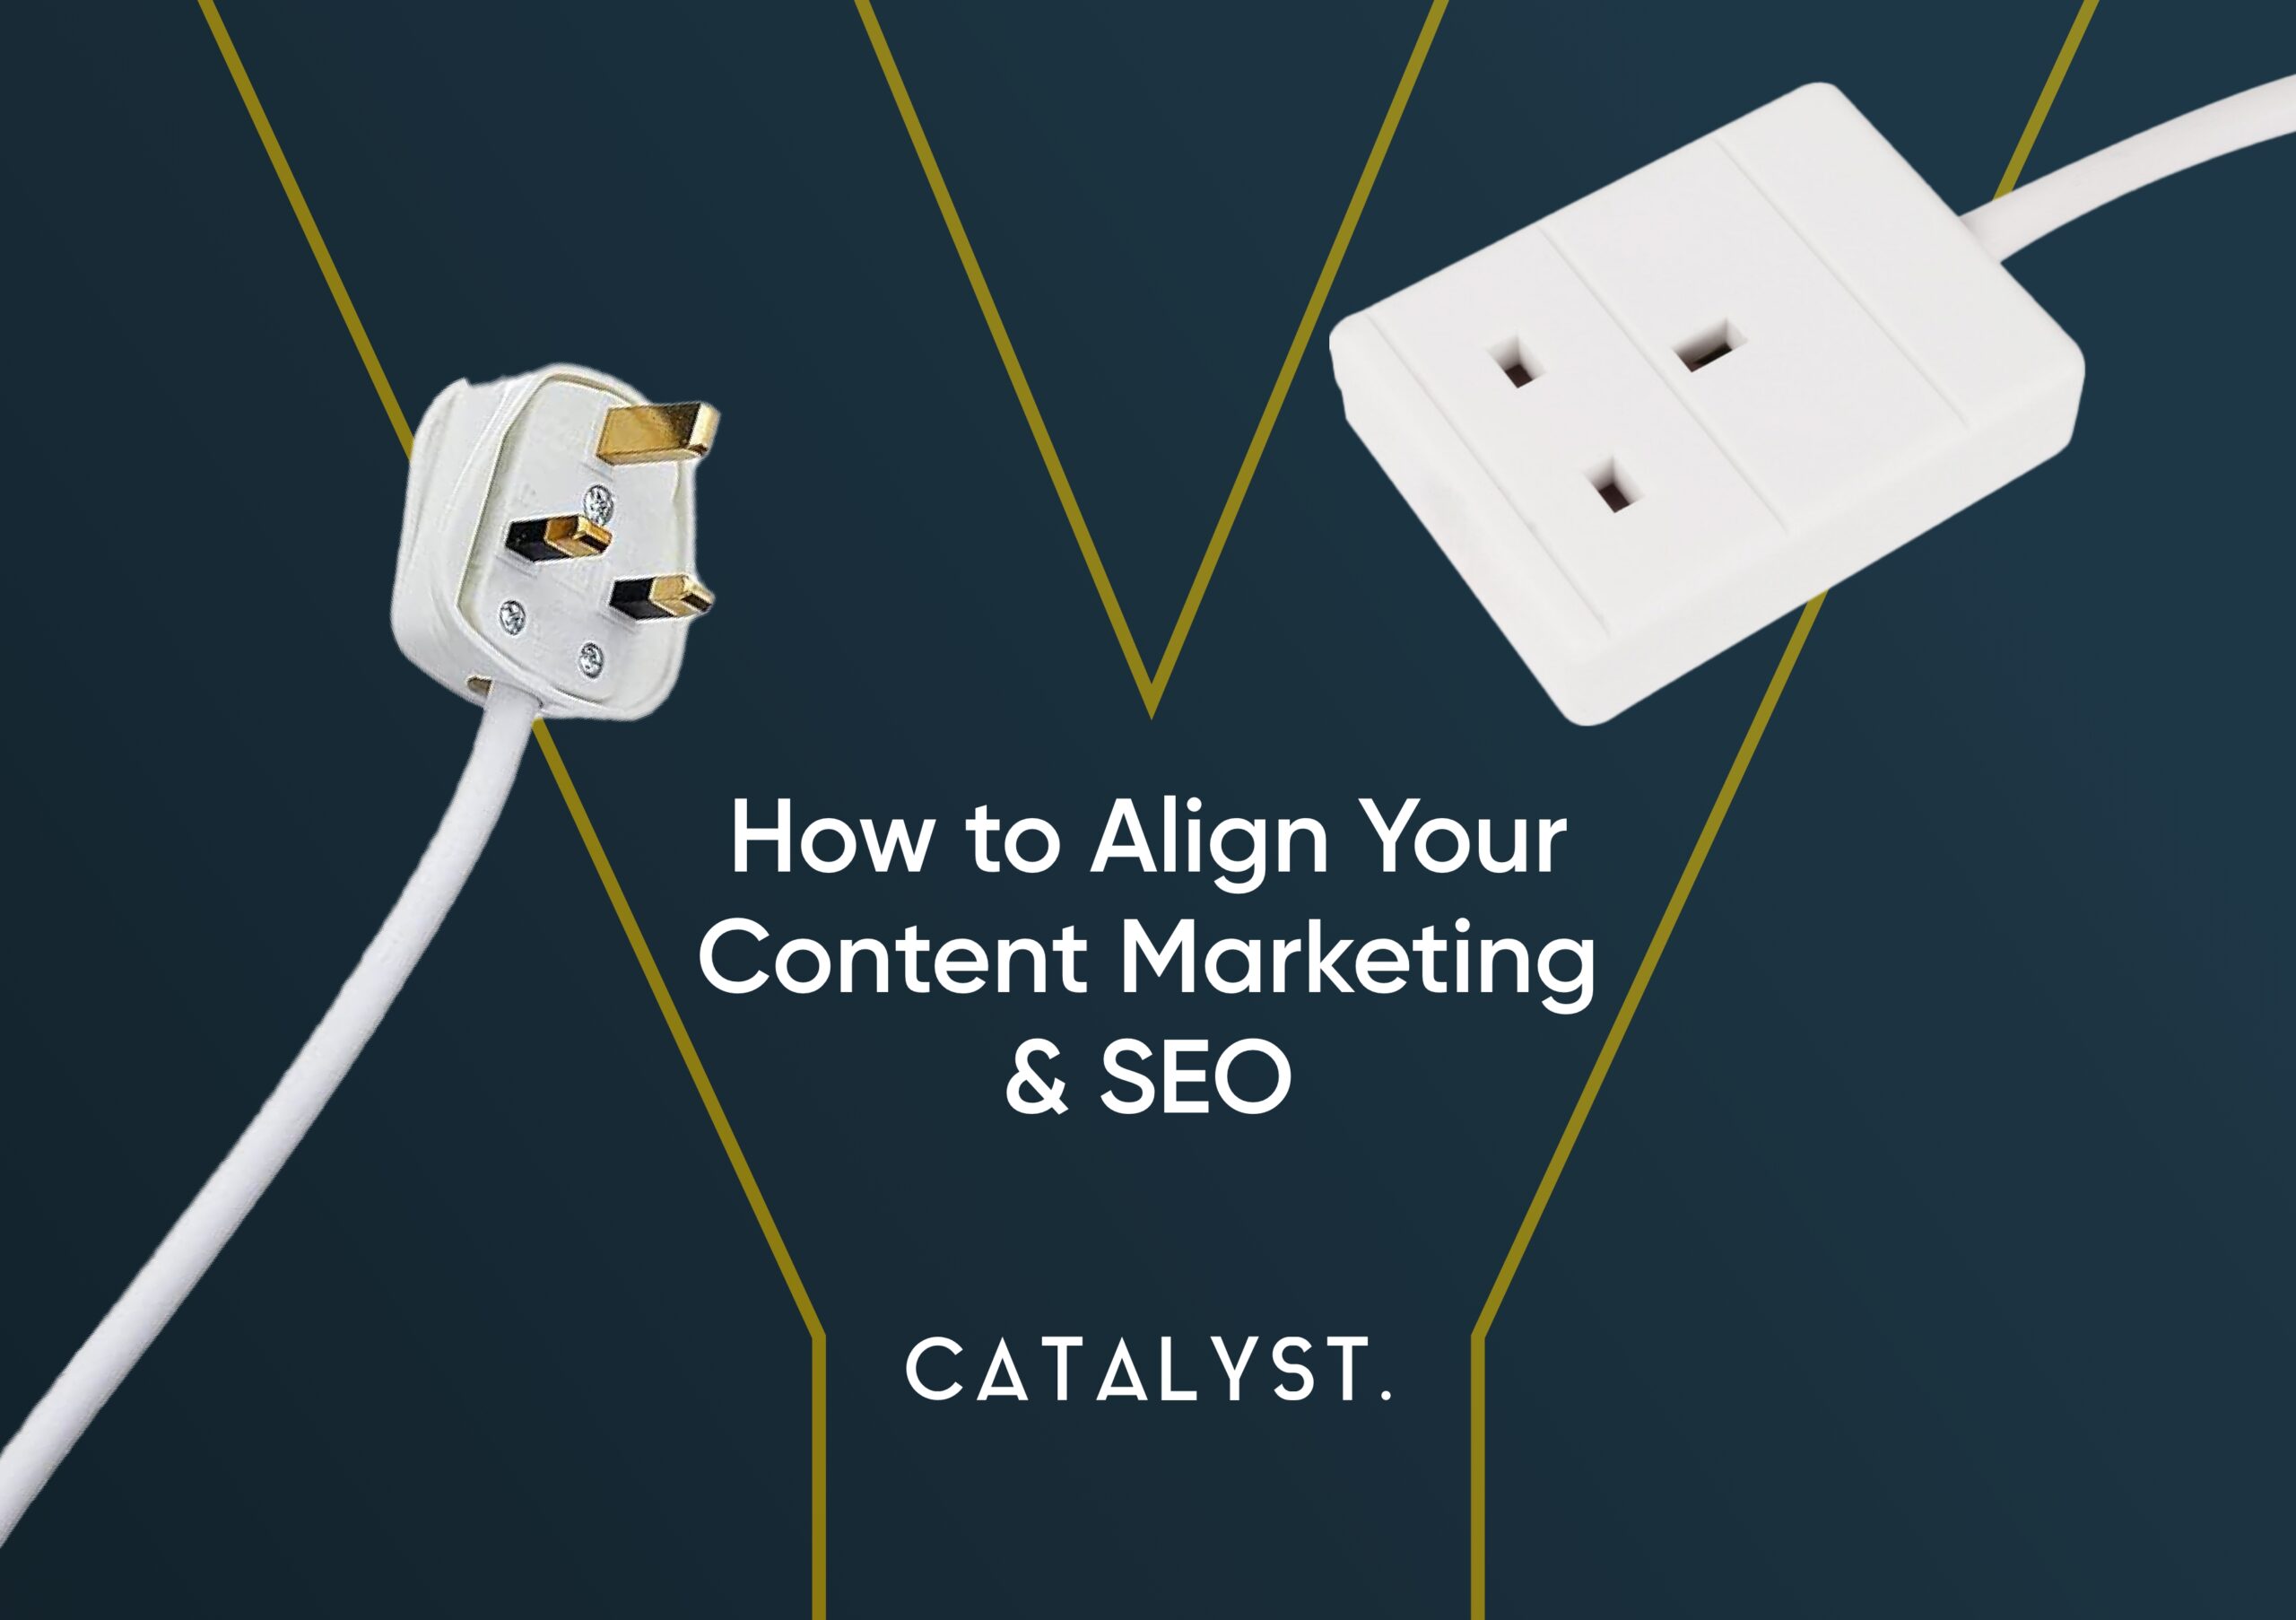 How to Align Your Content Marketing & SEO